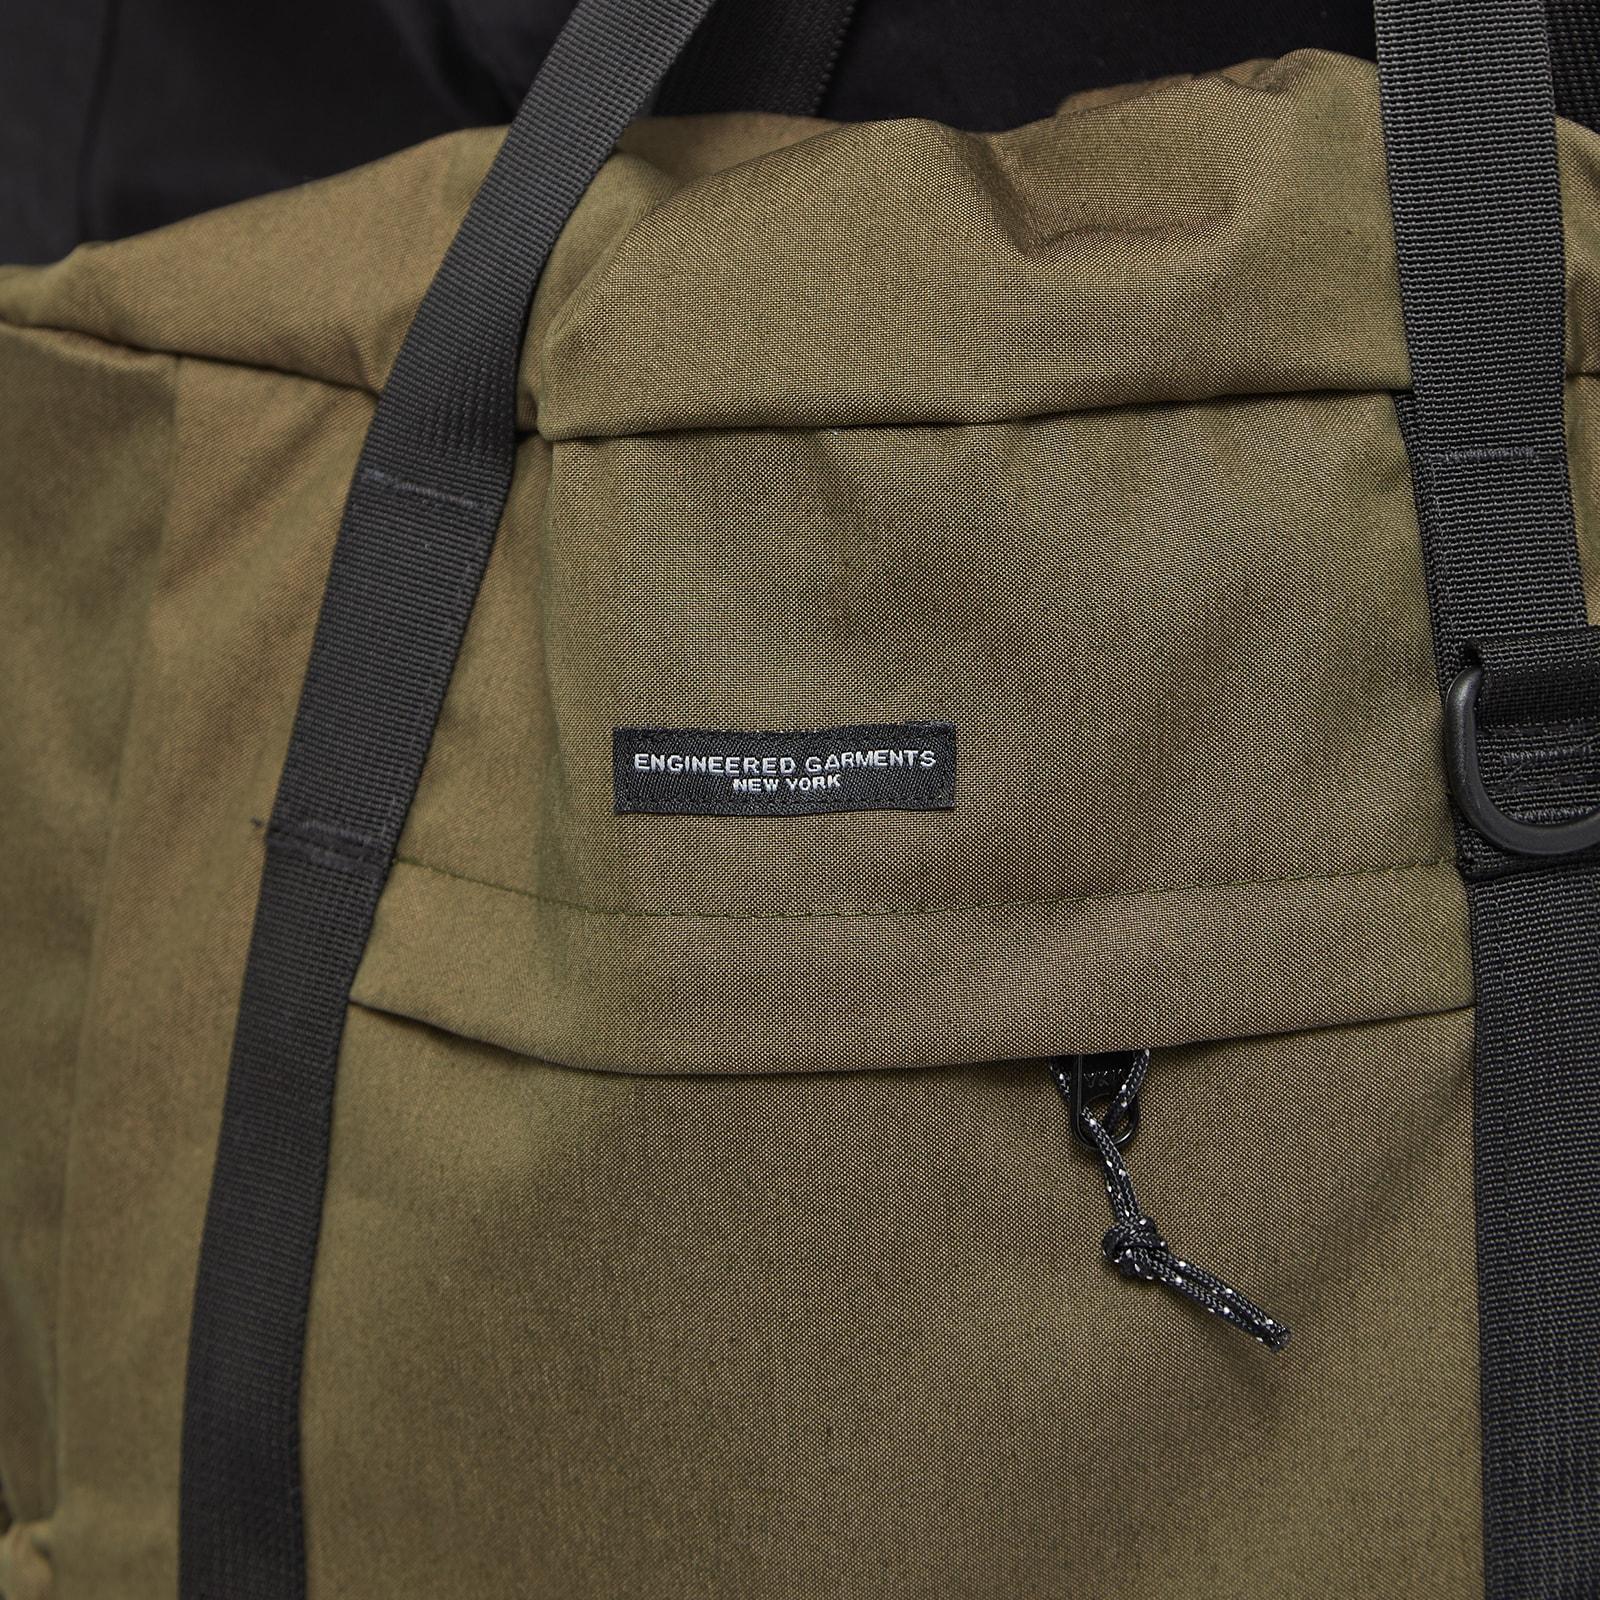 WHAT'S IN MY BAG  CARHARTT WIP ESSENTIALS BAG 'SMALL' REVIEW // INDIA 